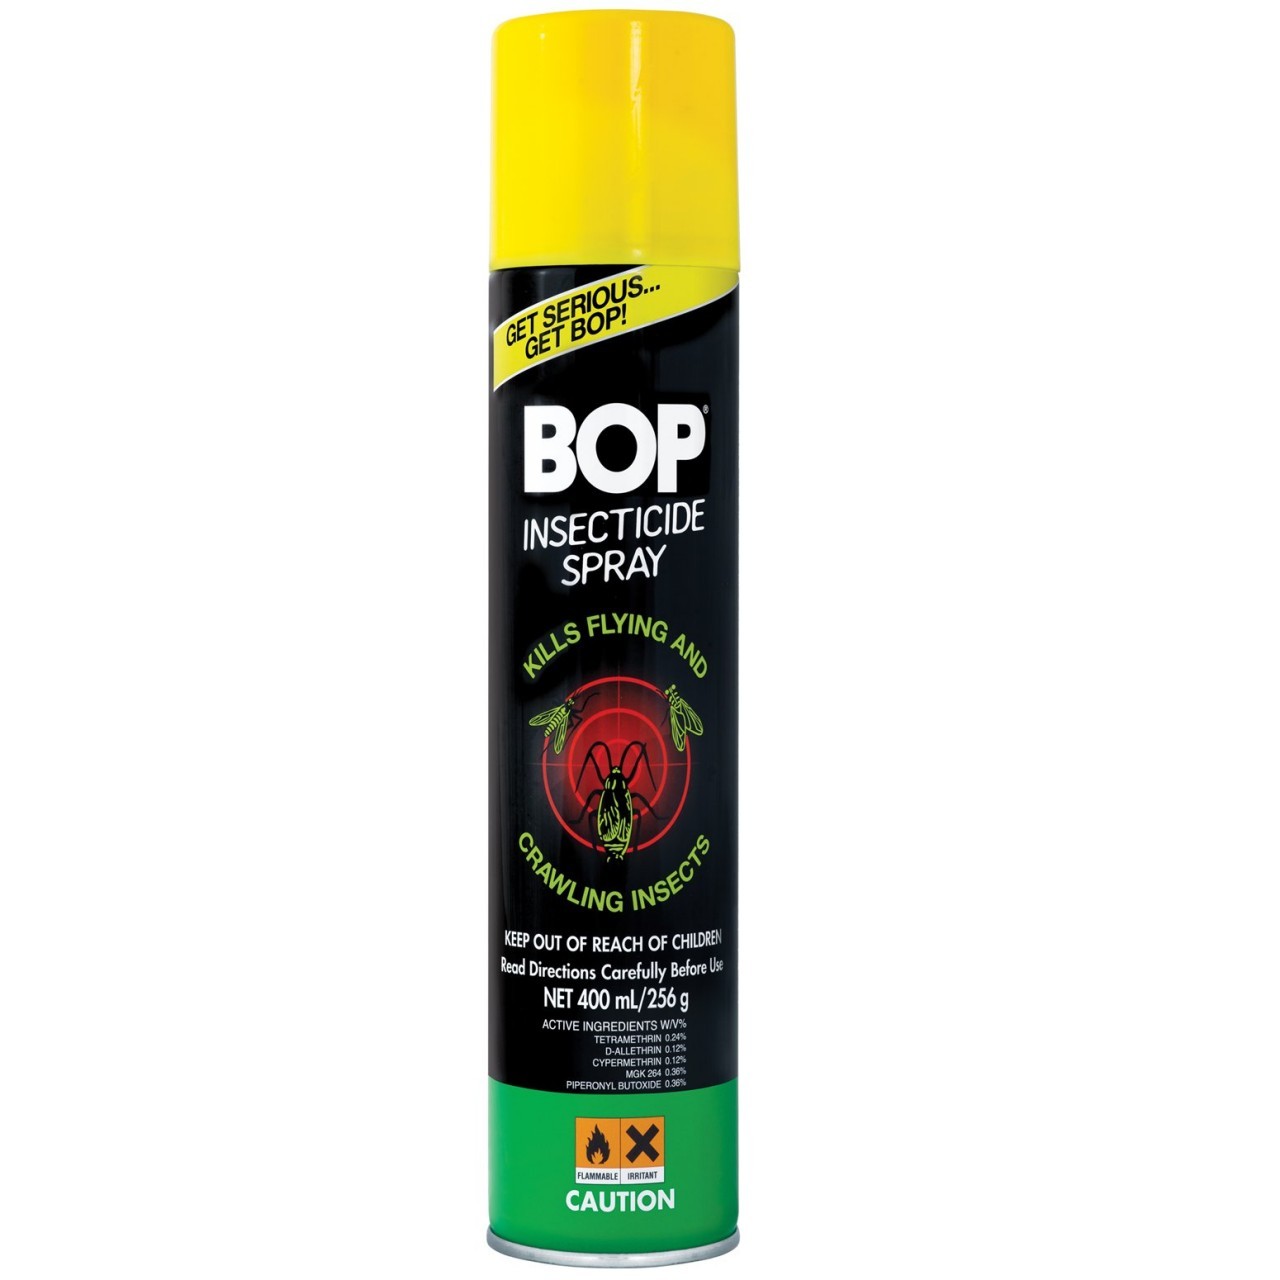 BOP INSECTICDE 600ml